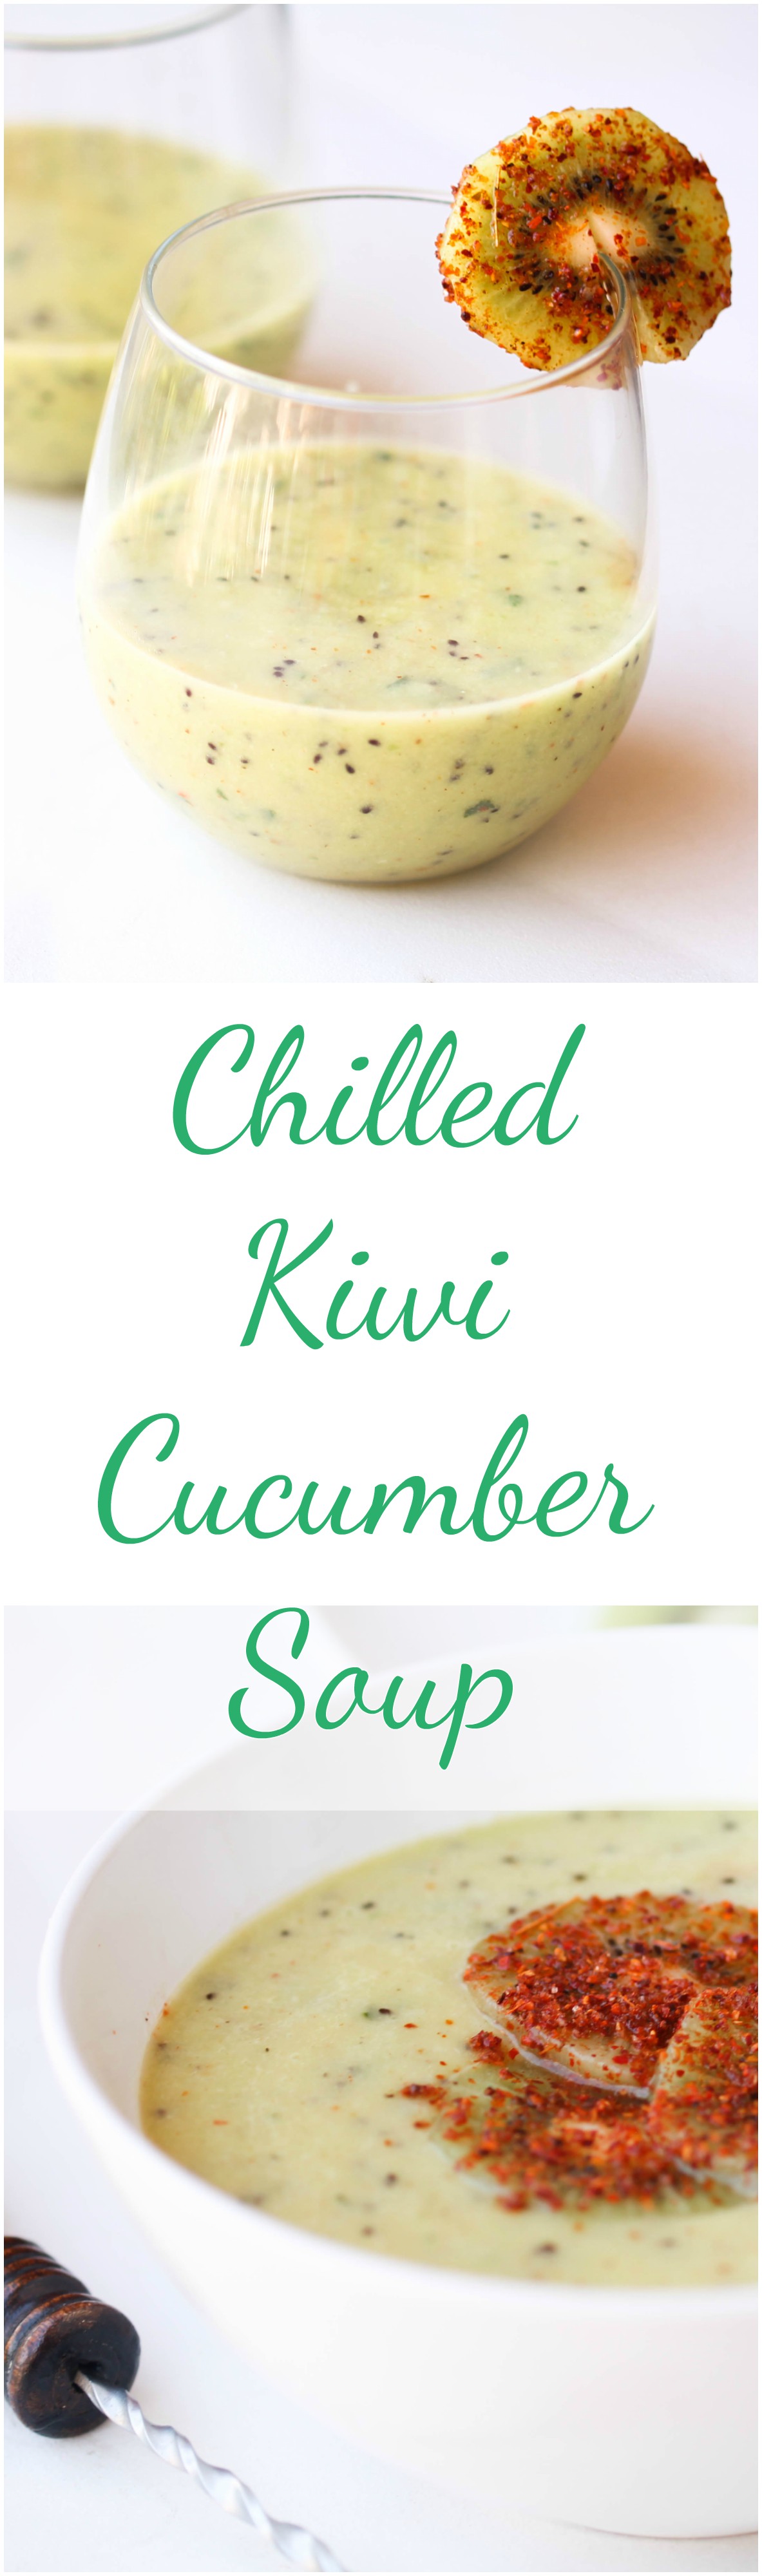 Chilled Kiwi Cucumber Soup : easy, refreshing naturally vegan, gluten-free soup that is ready in 30 minutes or less!